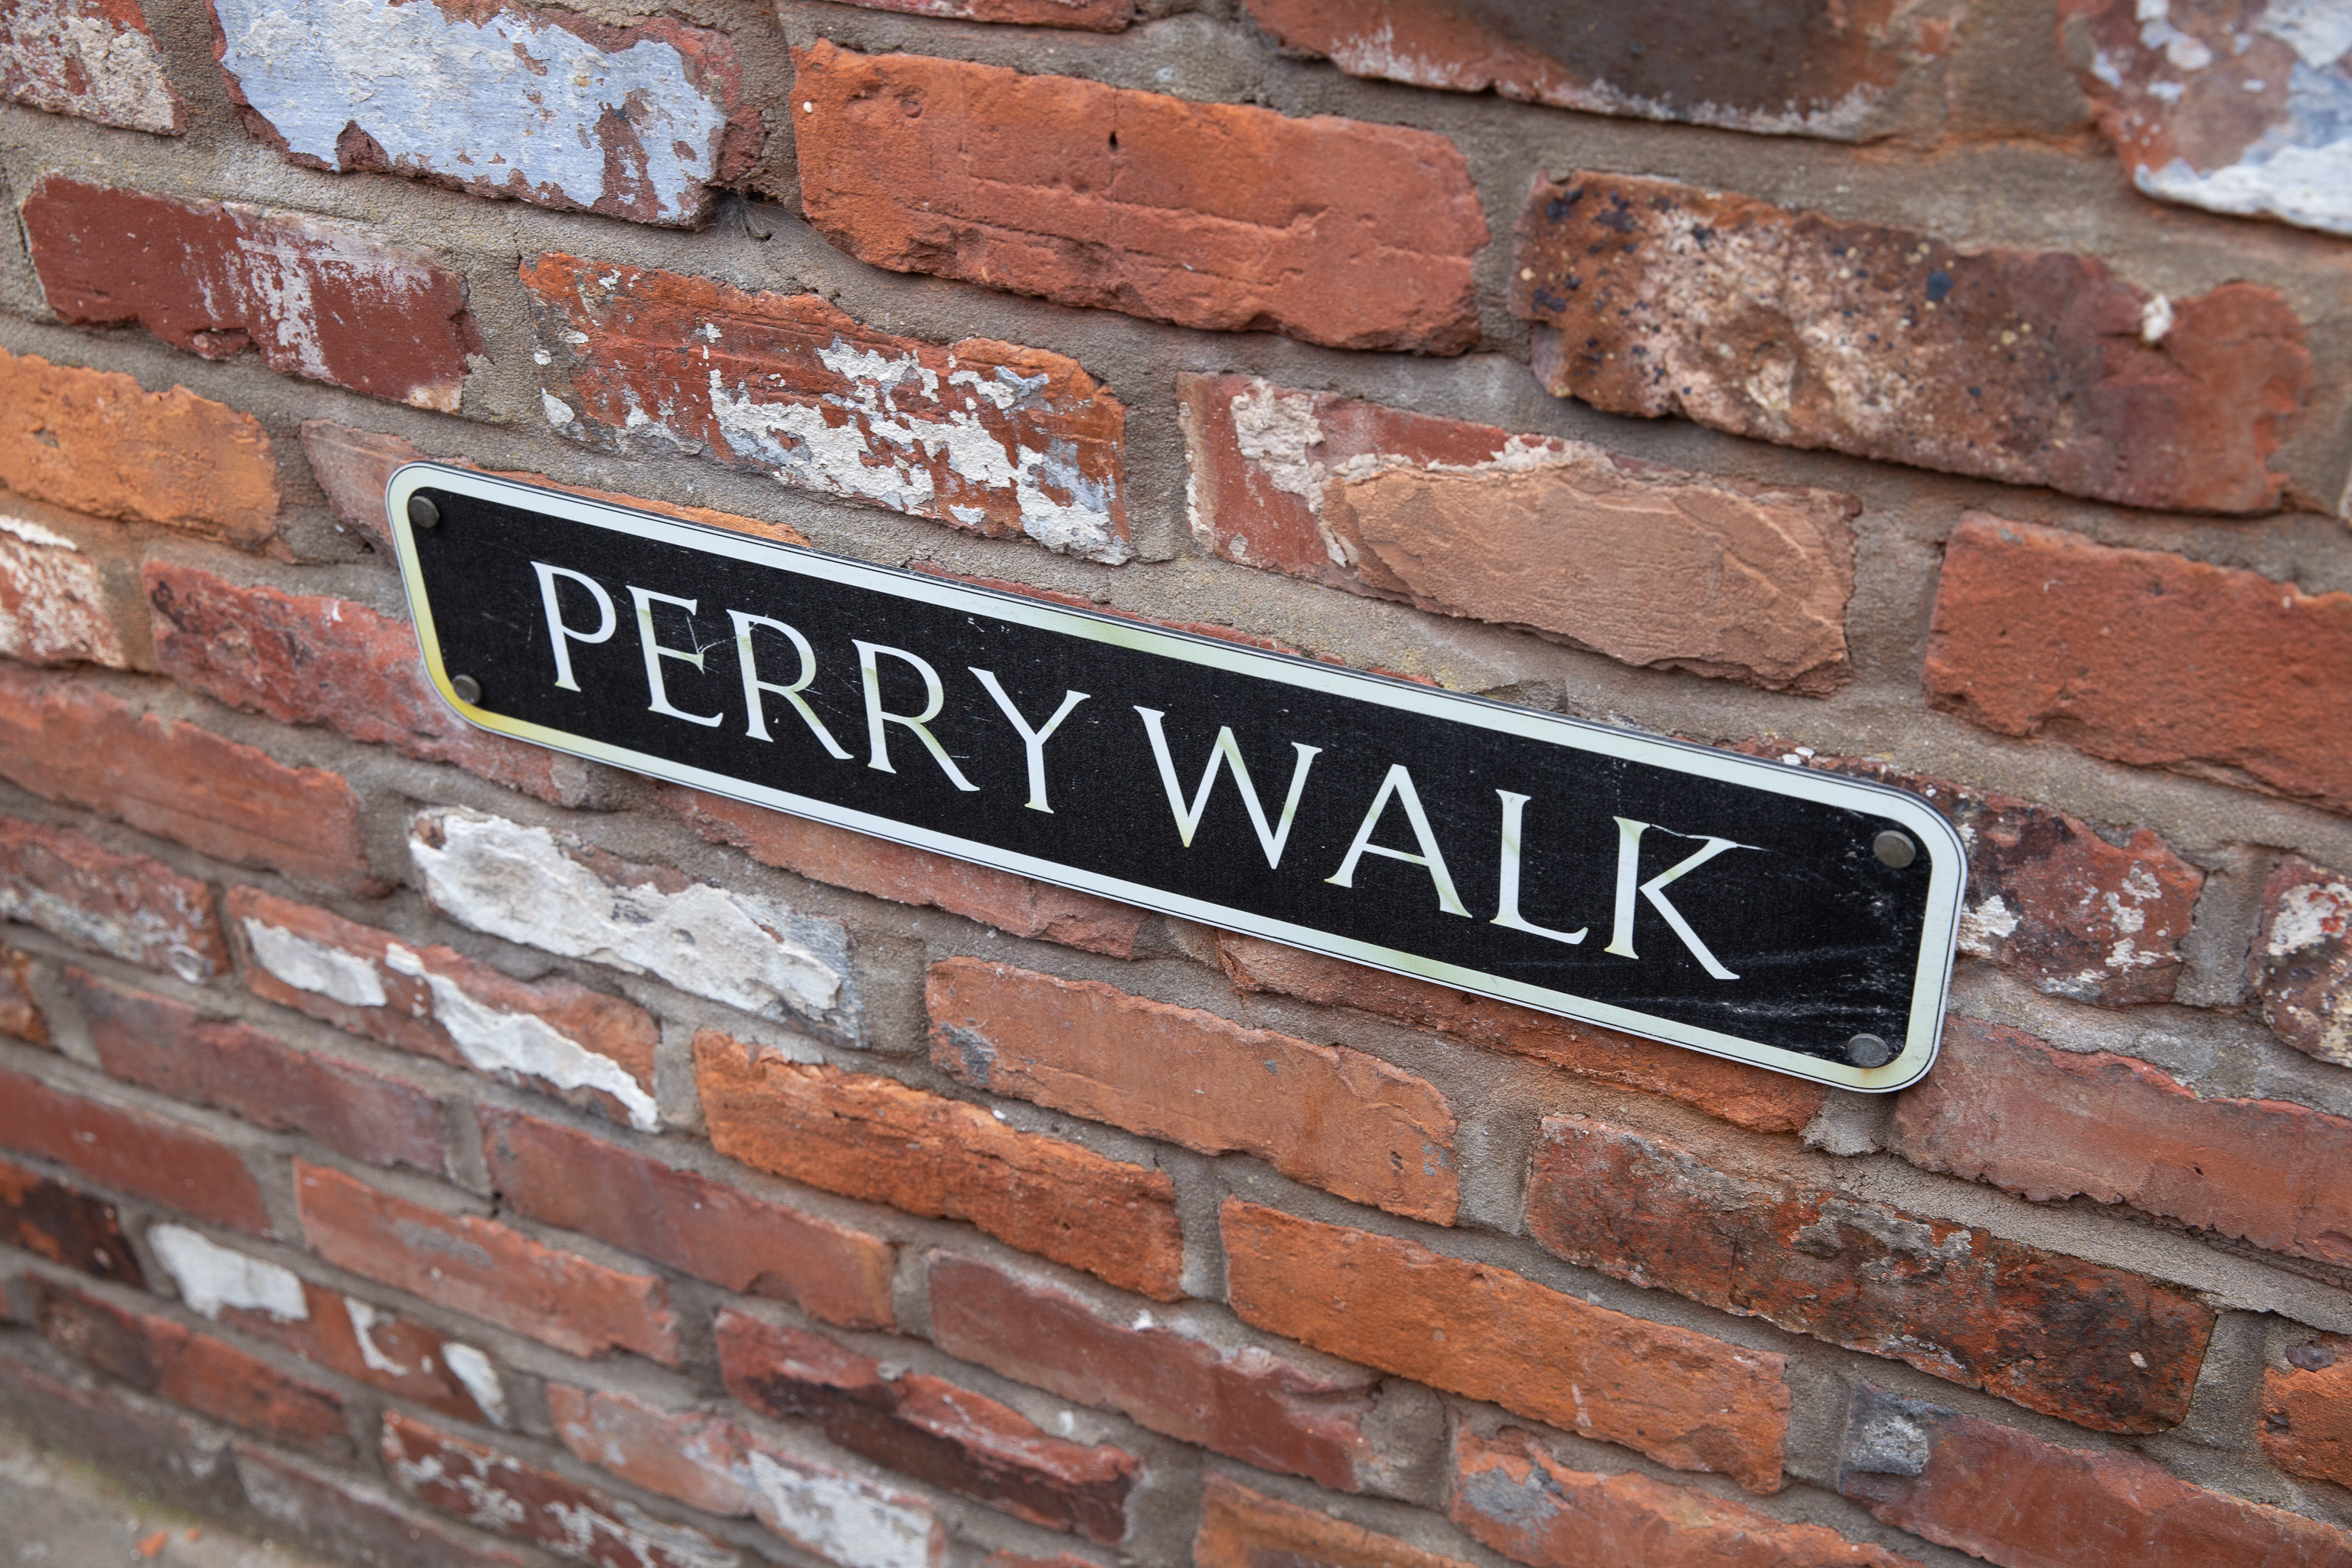 Perry Walk
...being the name of the unexpected alley. They're not often named. I wonder who Perry was?
